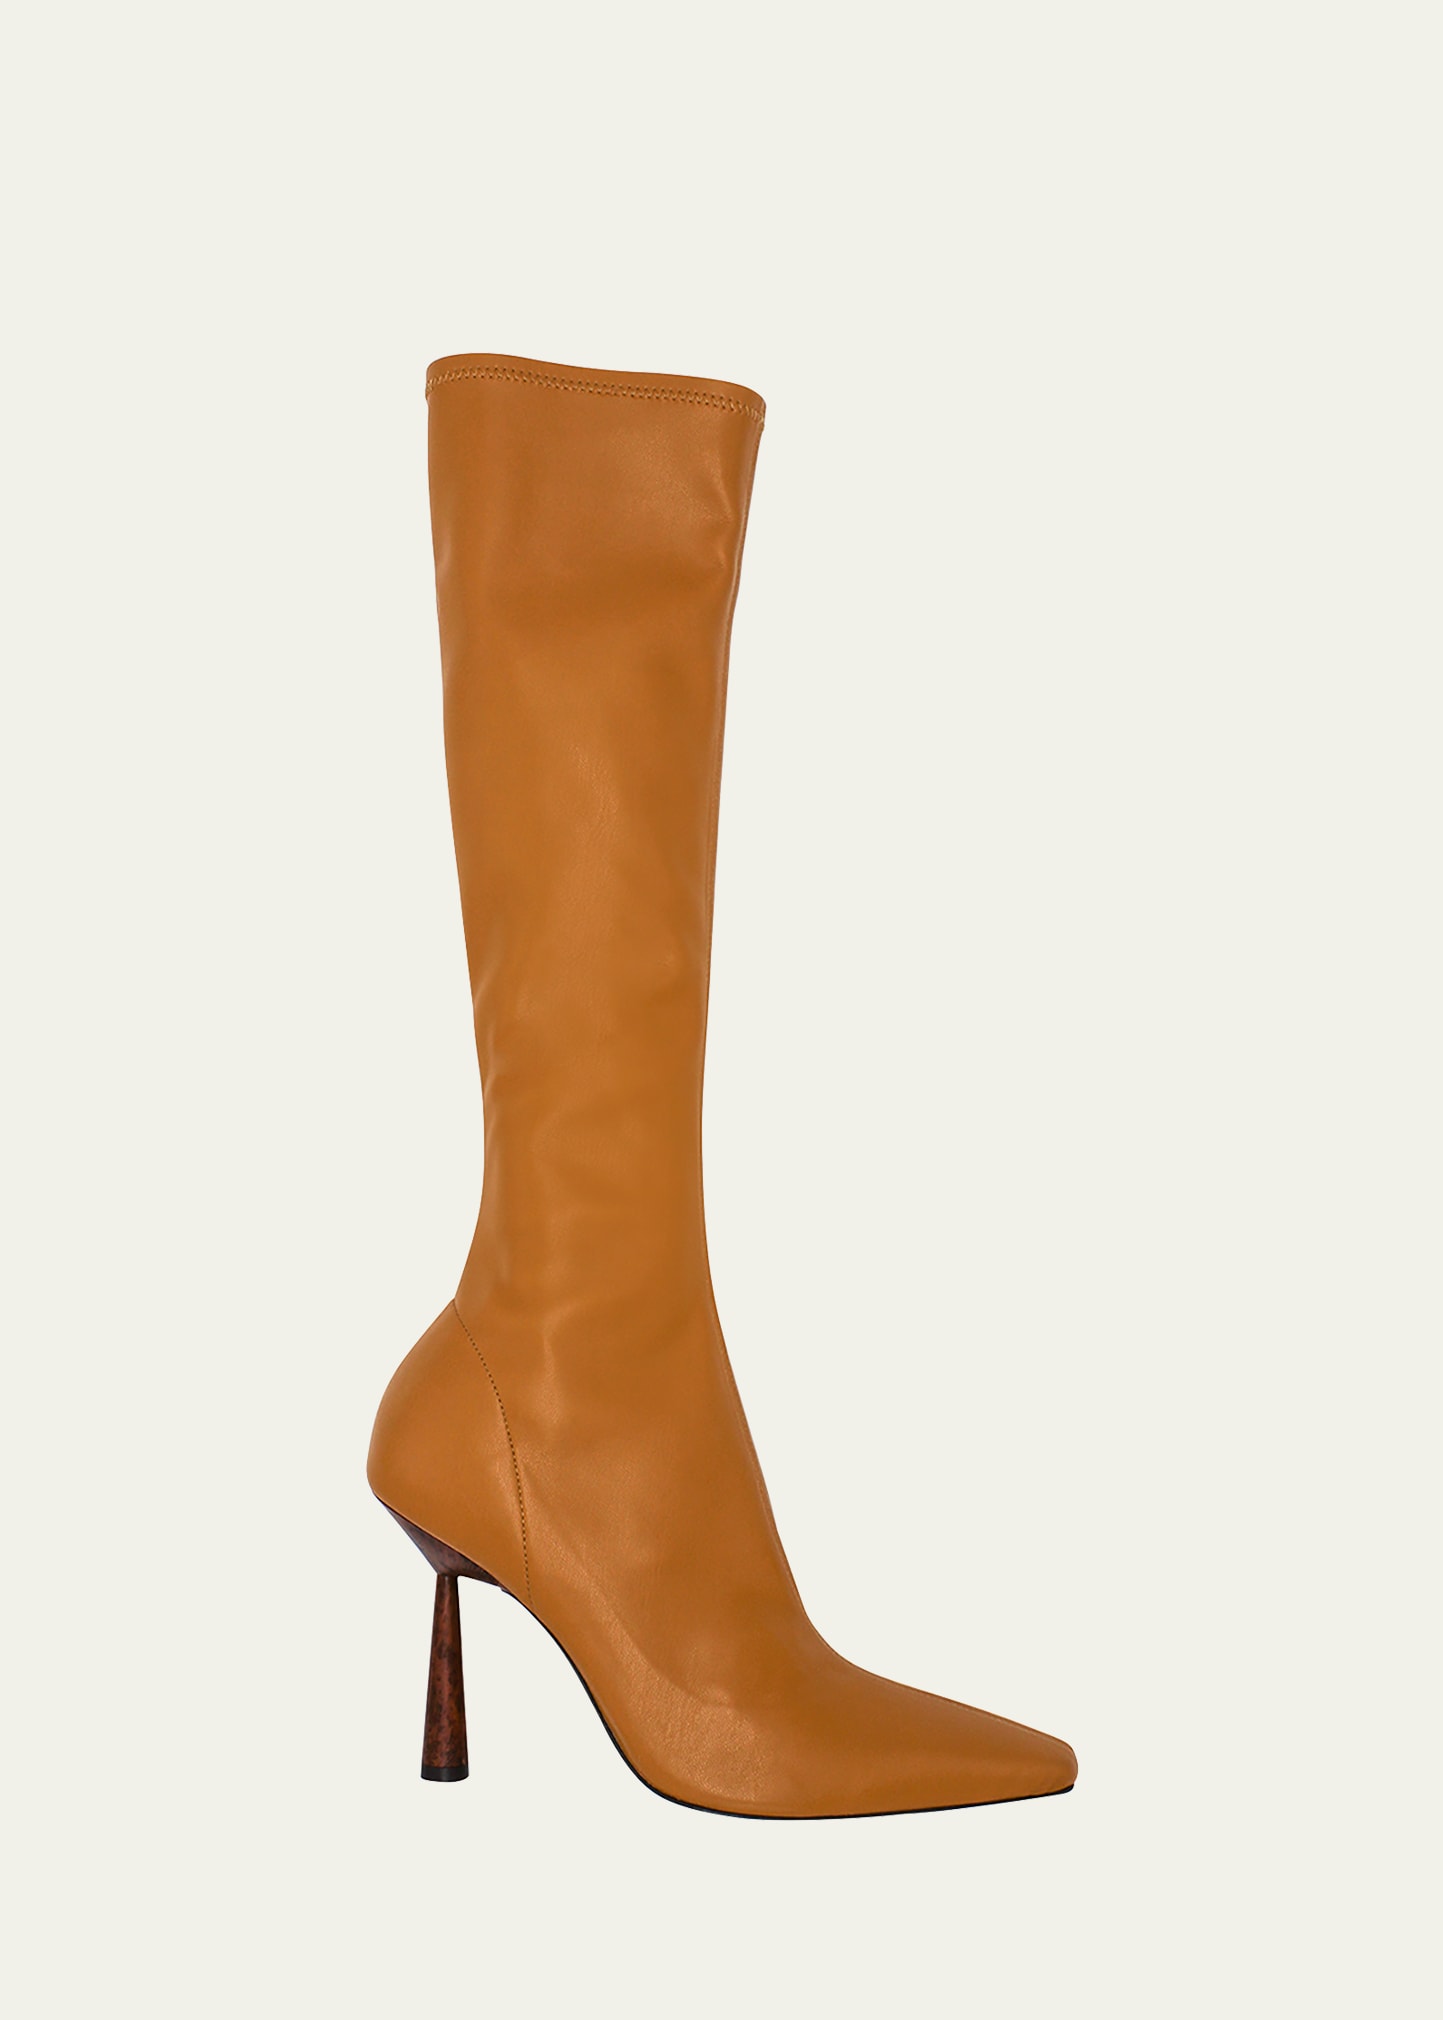 GIA/RHW 100mm Stretch Faux-Leather Knee-High Boots